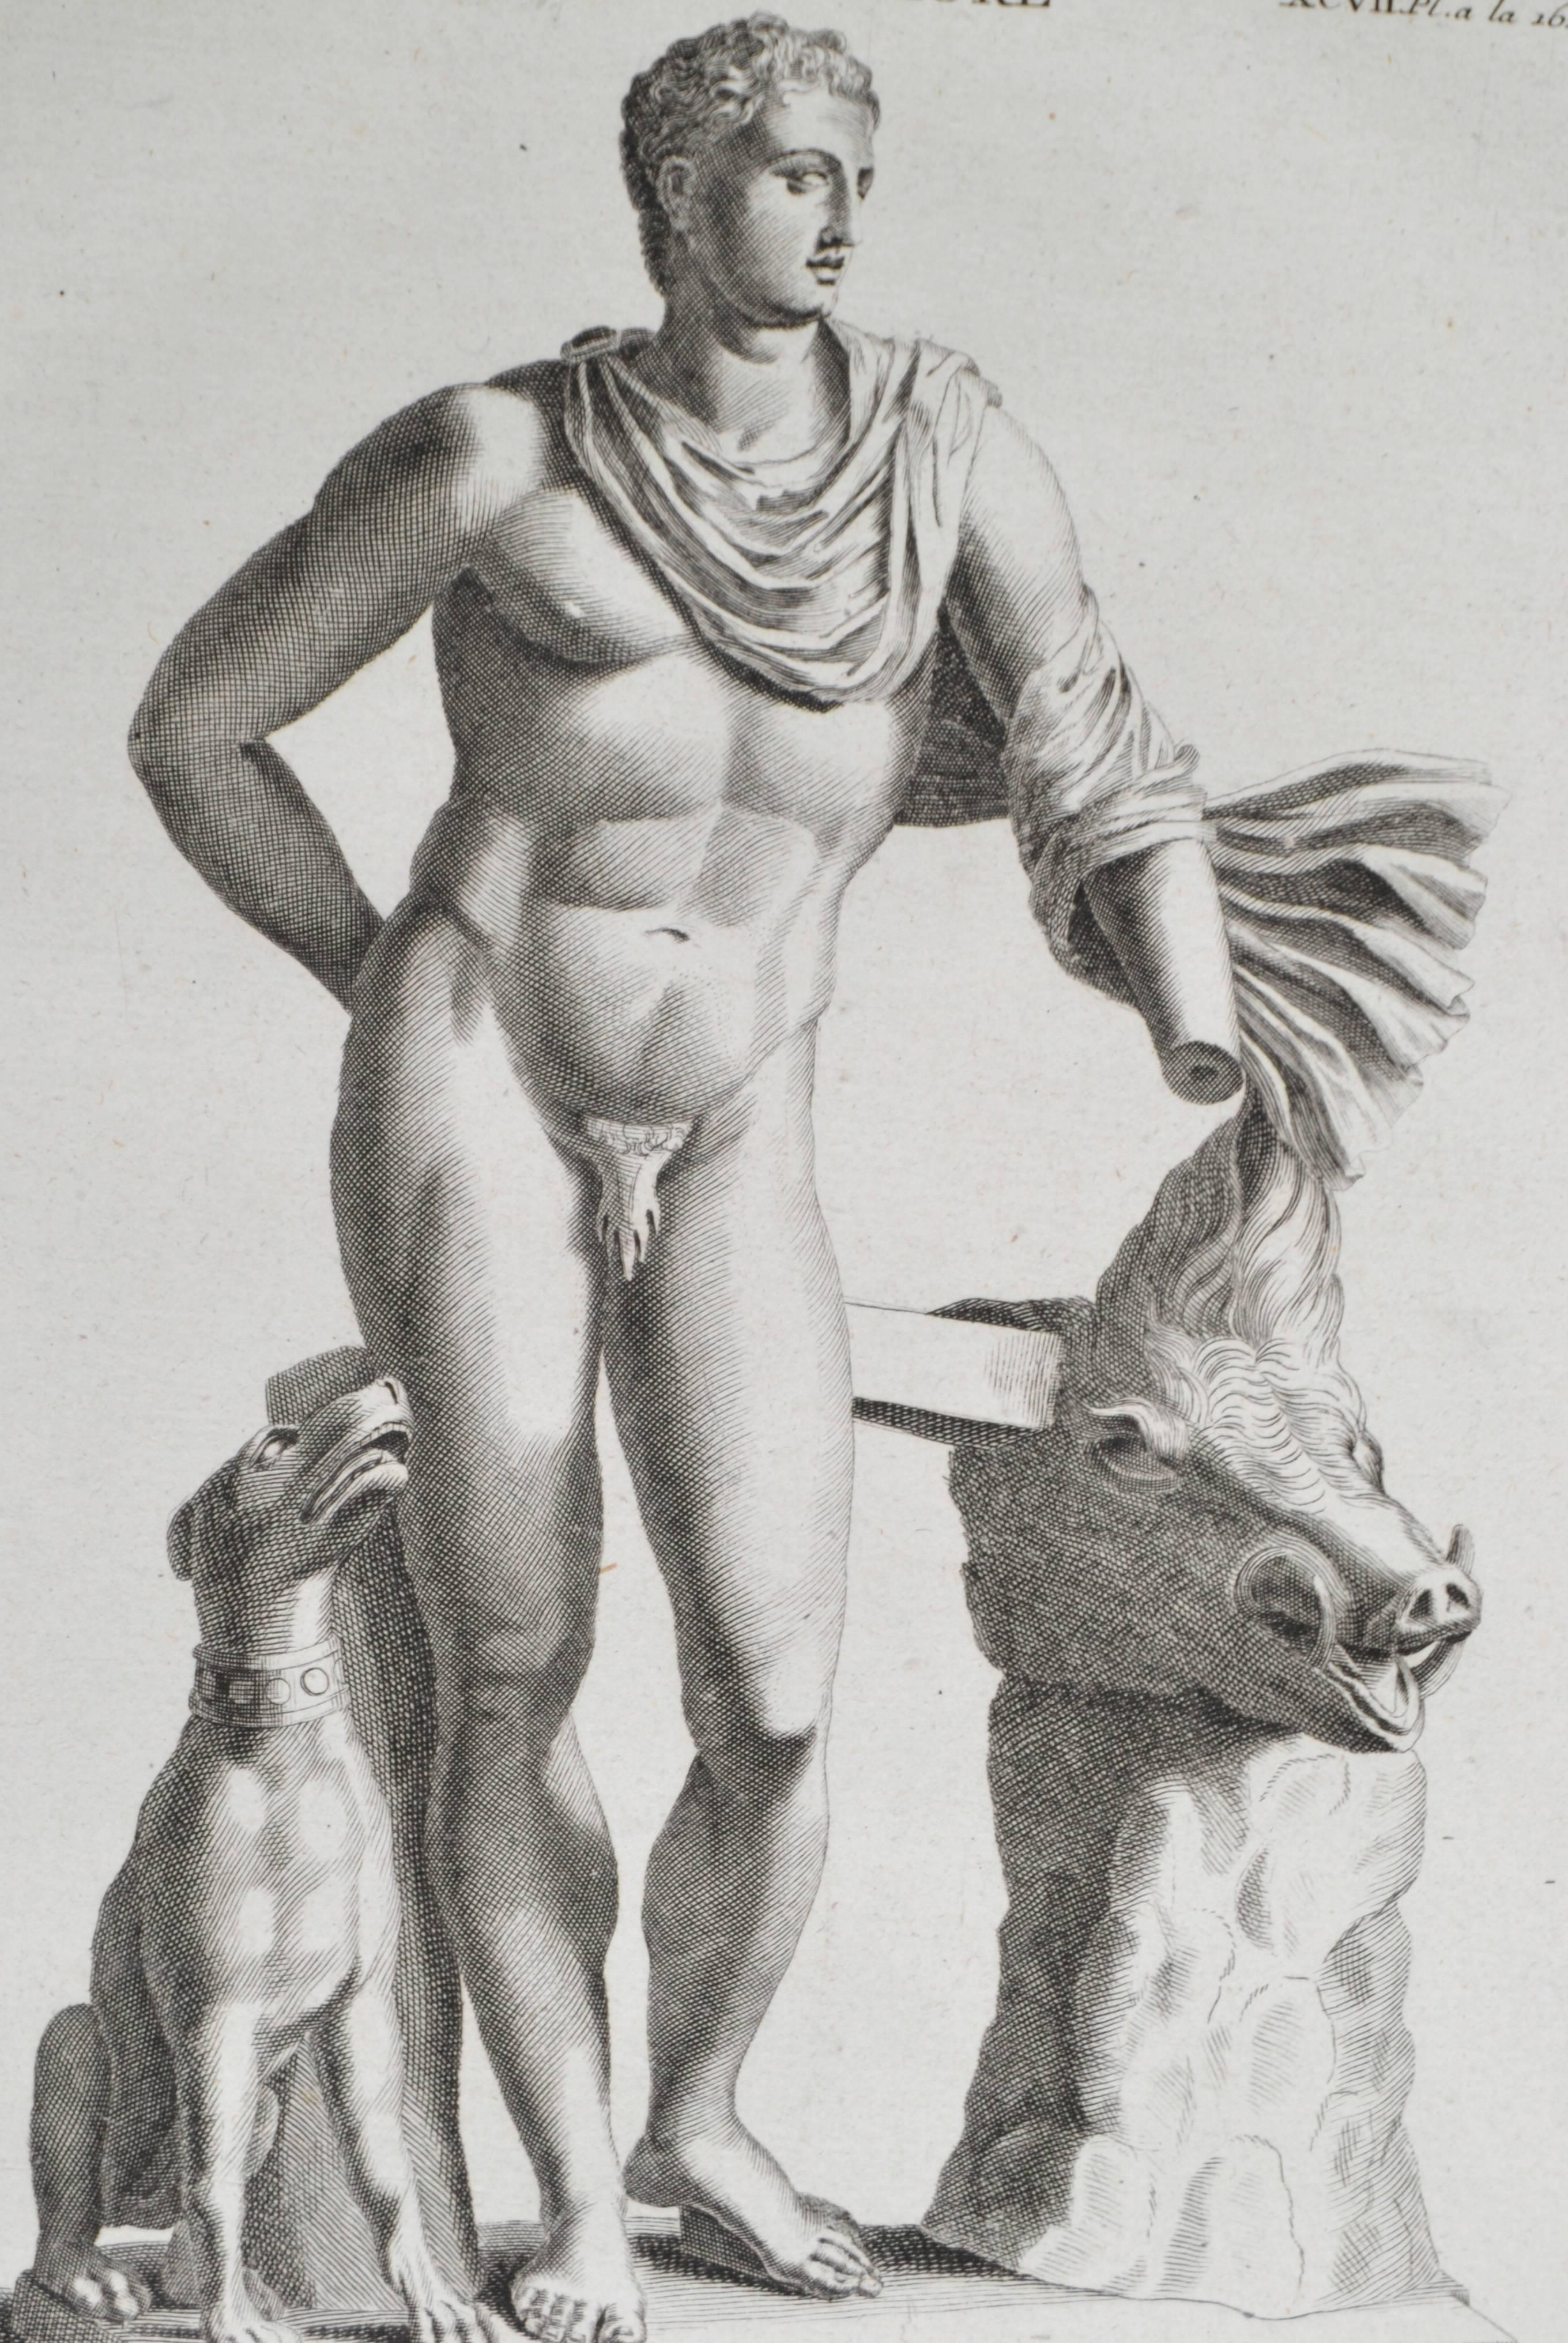 Copper engraving featuring Meleager.
From the book L'antiquite Expliquee et Representee en Figures. By the Benedisctine Monk Bernard de Montfaucon.
In mat and ready to frame.